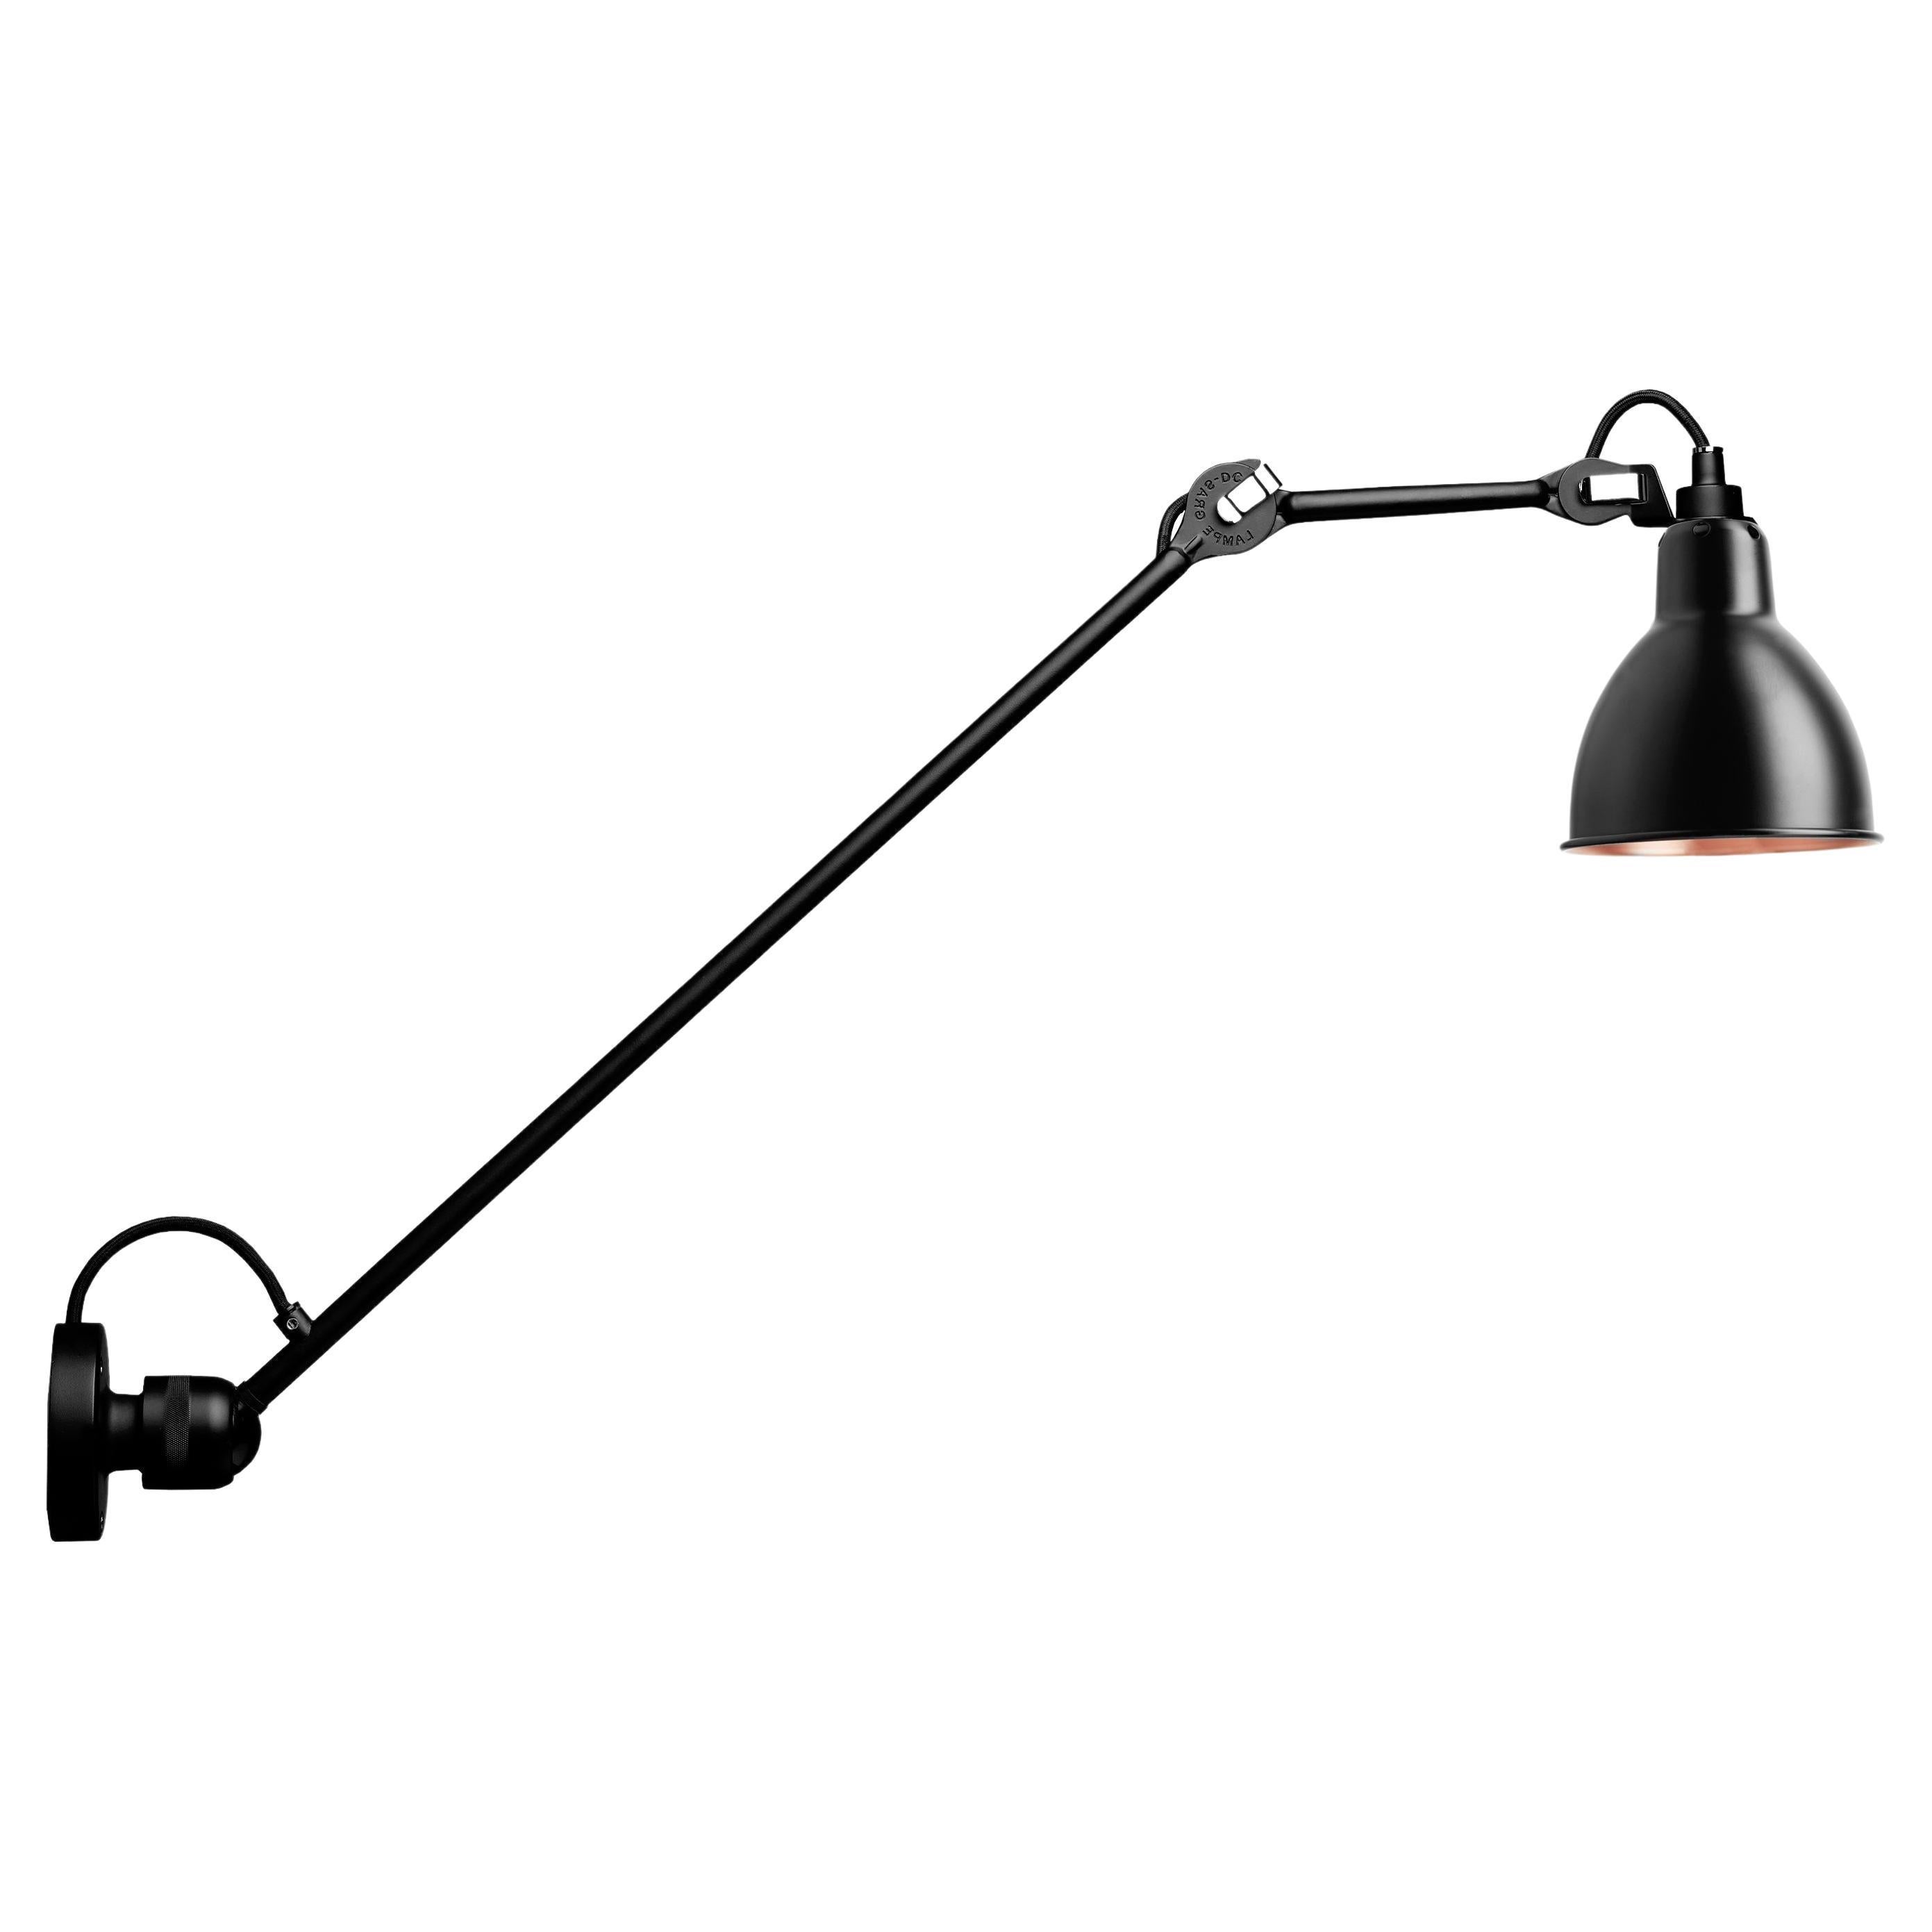 DCW Editions La Lampe Gras N°304 L60 Wall Lamp in Black Arm and Black Copper